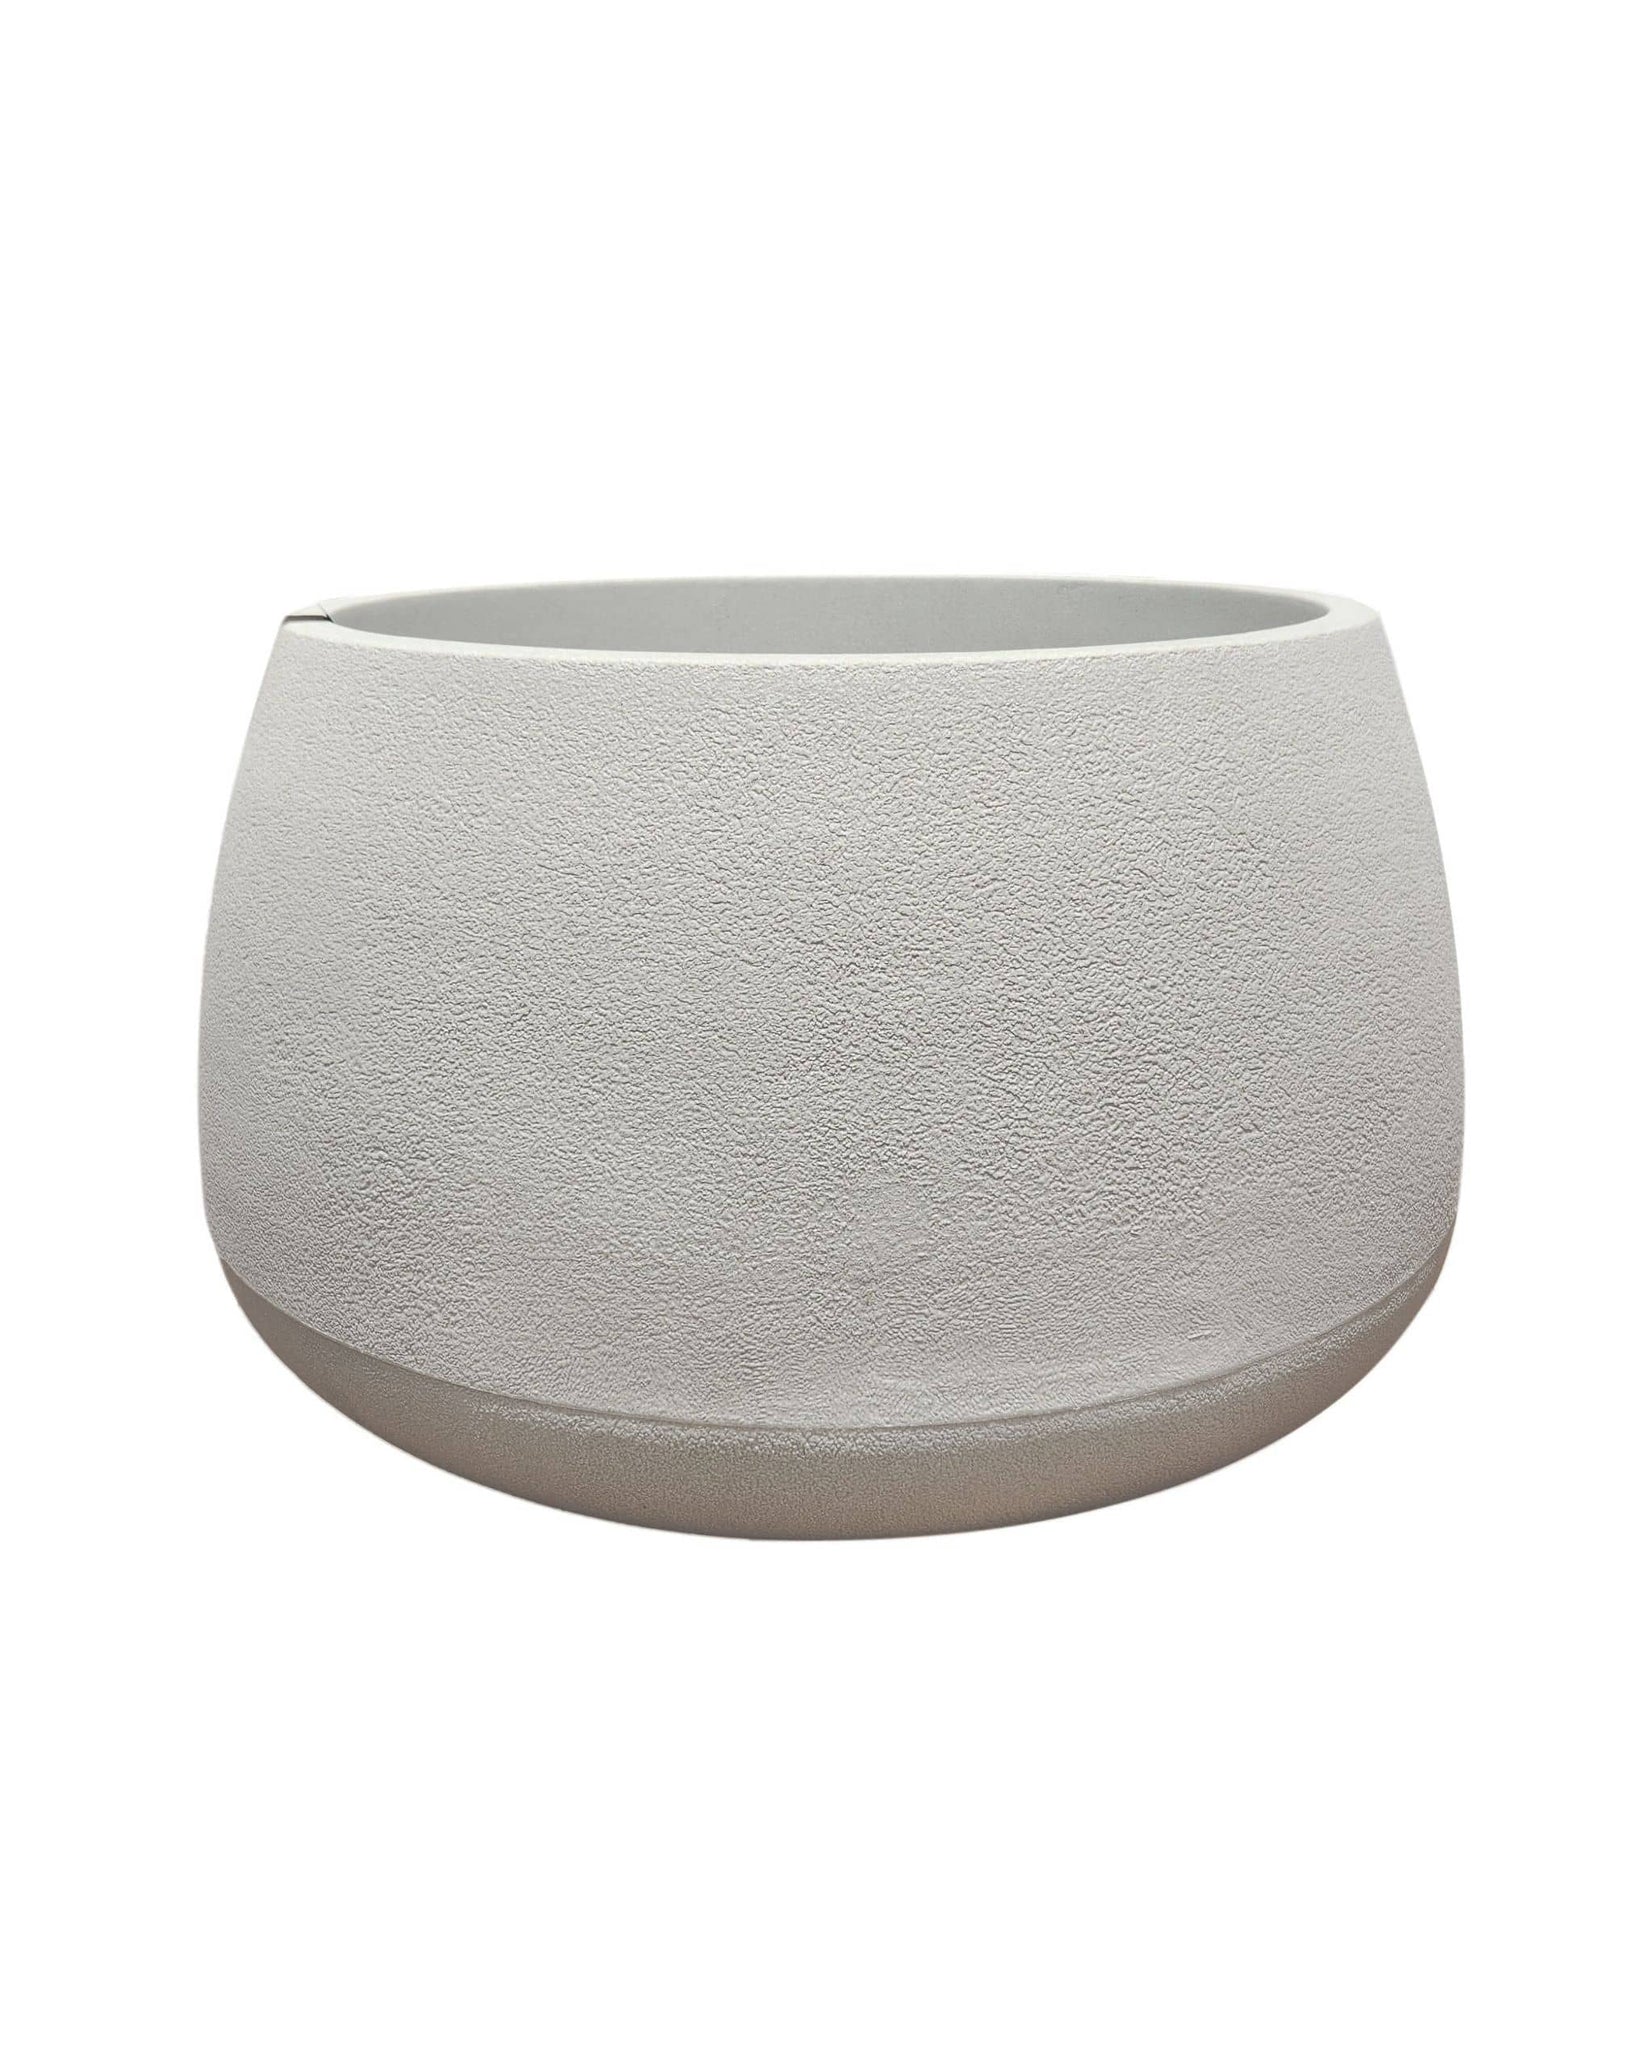 Bios Low Japi Planter. Sandstone colour, Low rise modern contemporary plant pot with stunning slightly textured finish, and wide neck for planting.